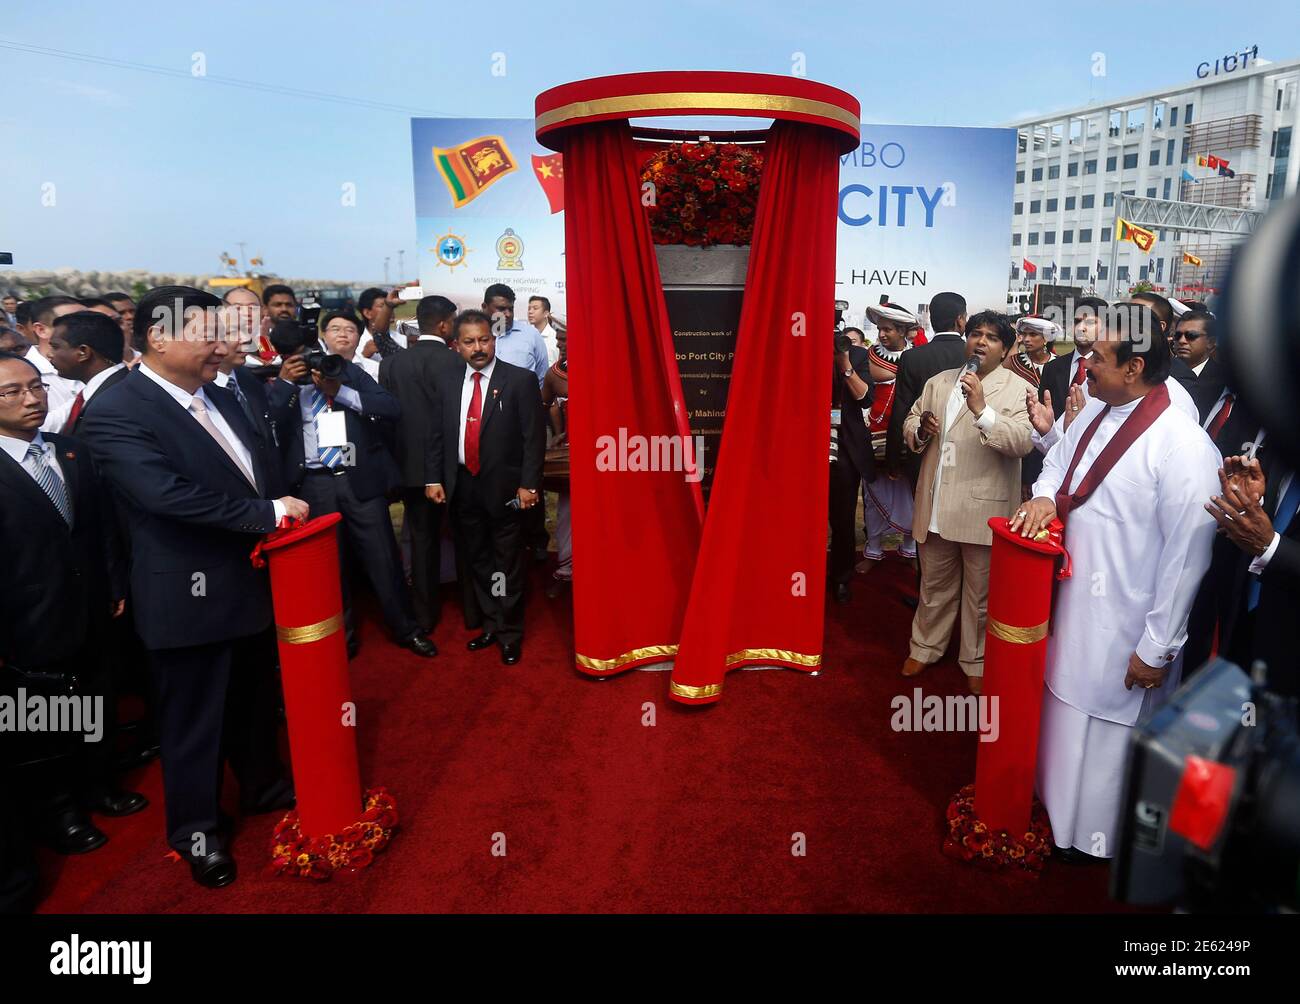 China's President Xi Jinping (2nd L) and Sri Lanka's President Mahinda  Rajapaksa (R) unveil a plaque during the launch ceremony of a $1.5 billion  project to build a port city on reclaimed